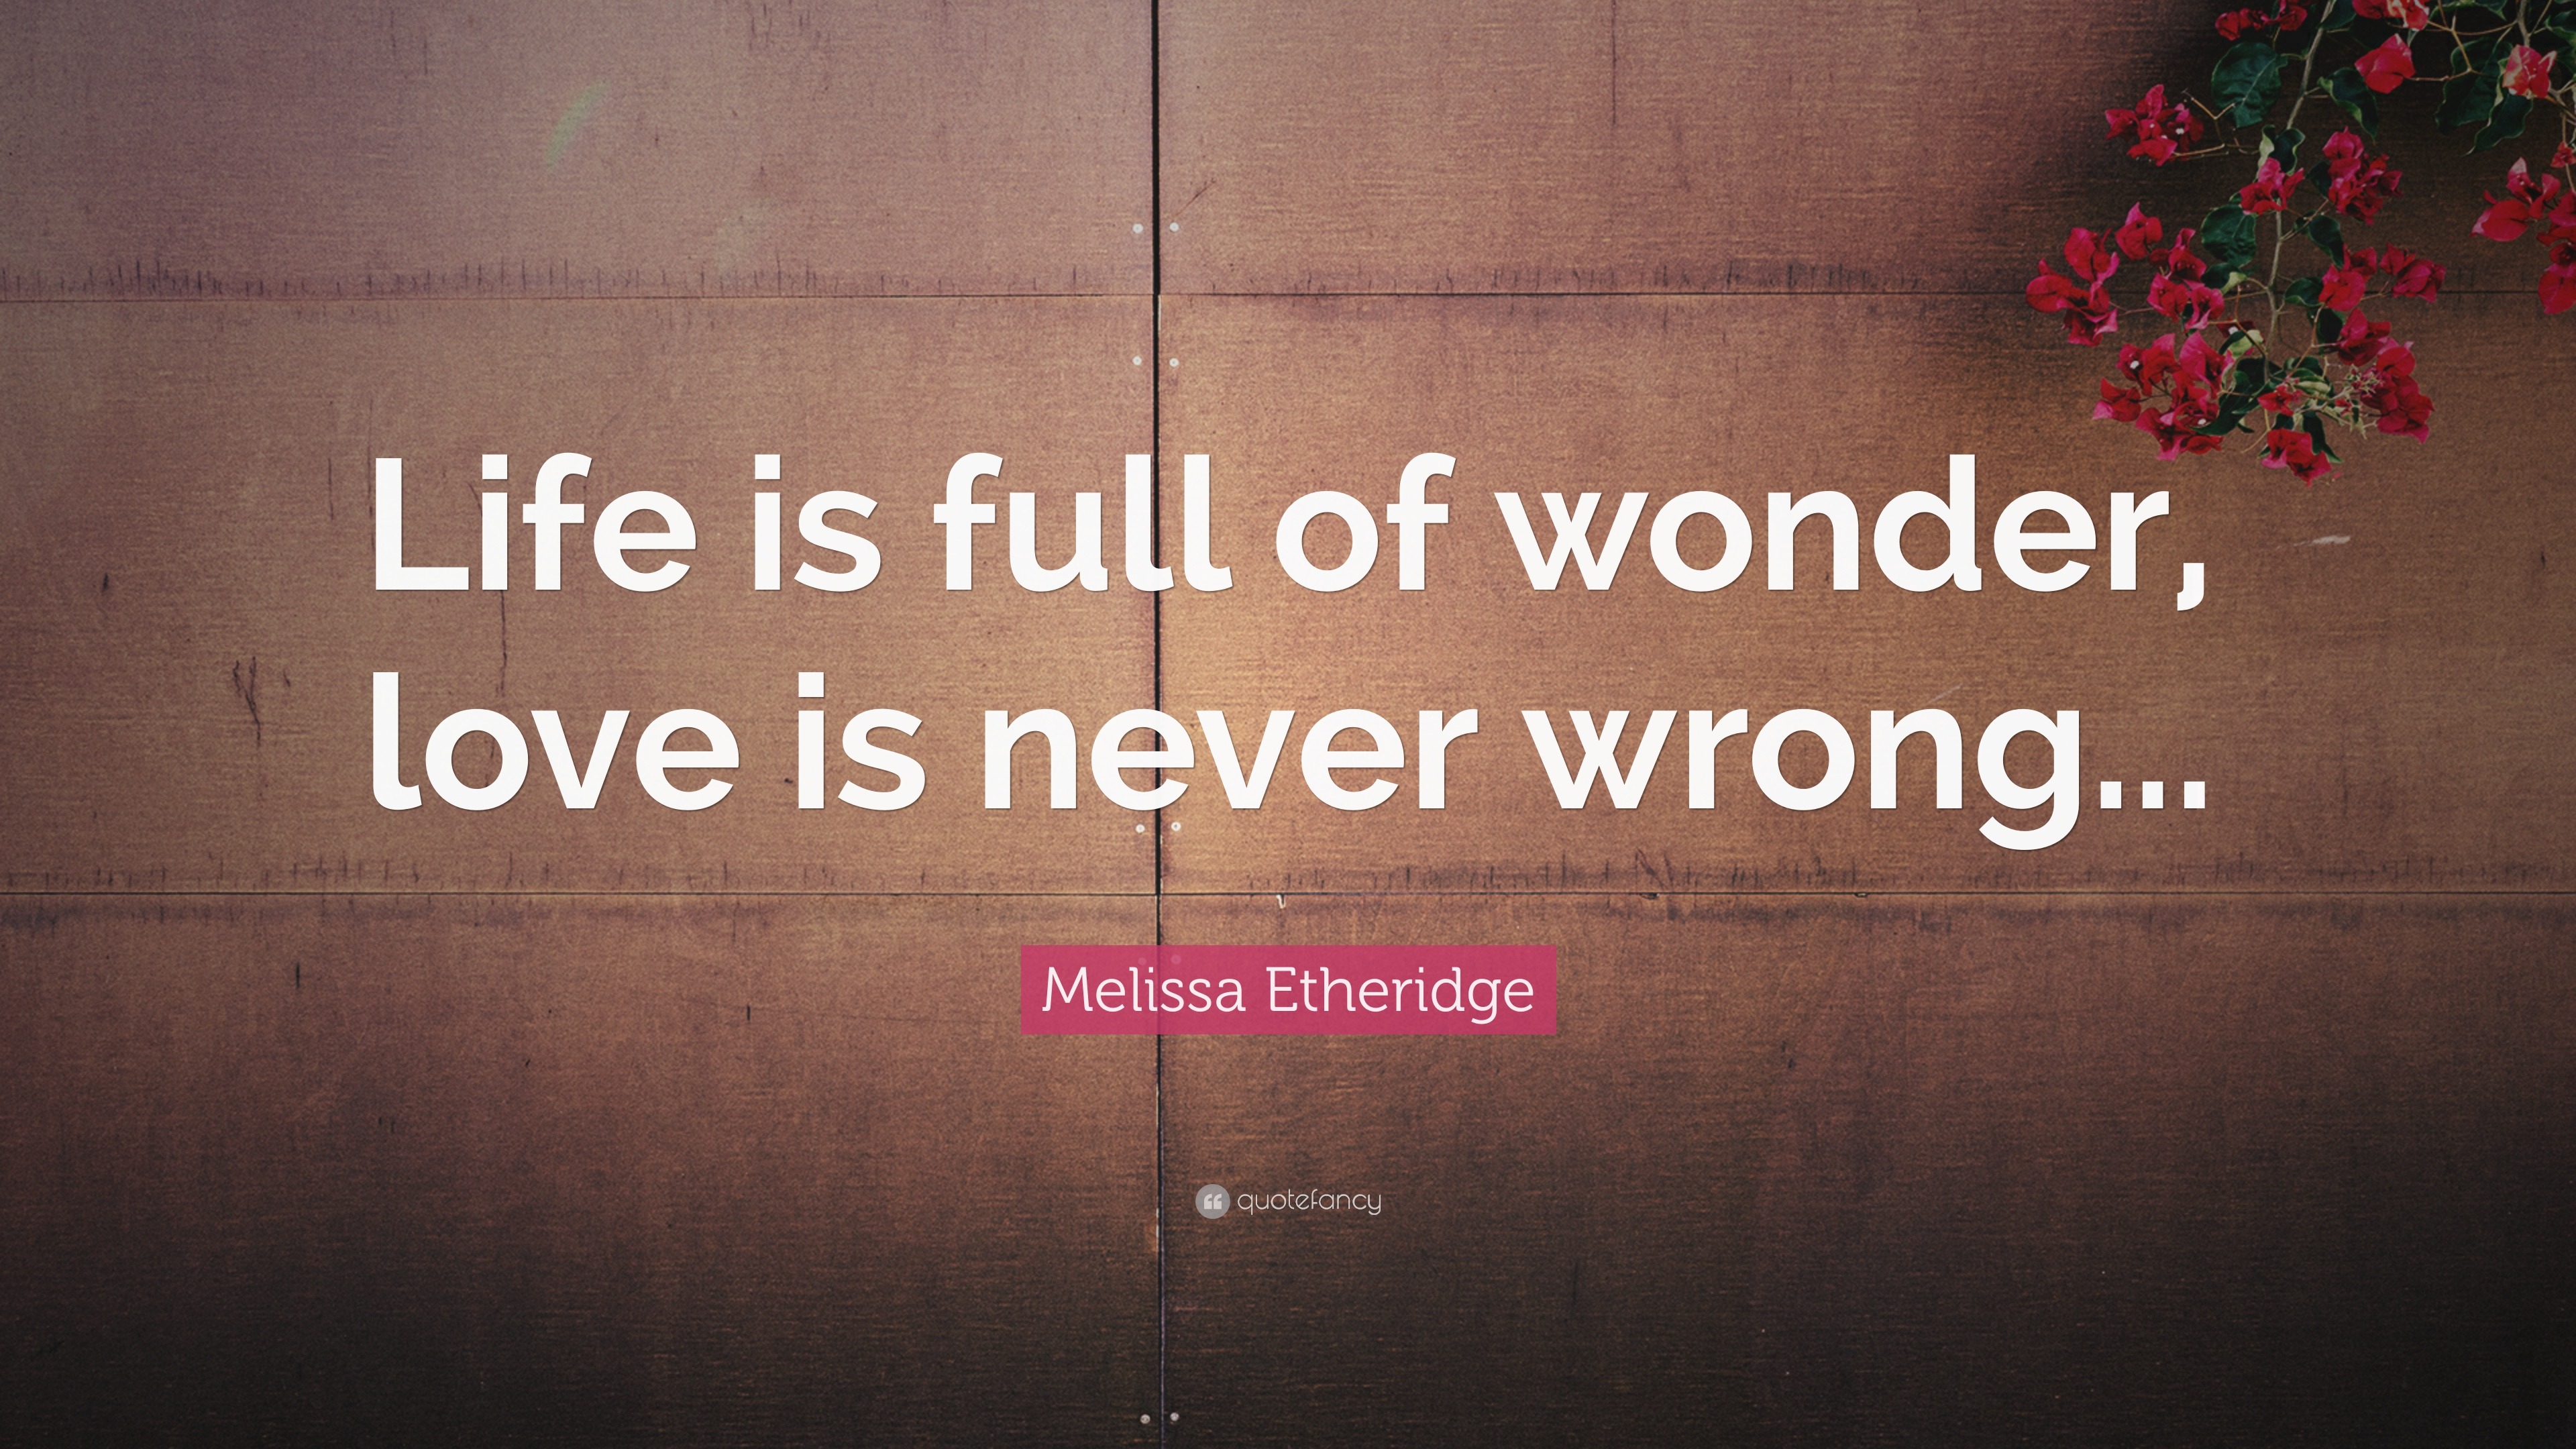 Melissa Etheridge Quote “Life is full of wonder love is never wrong